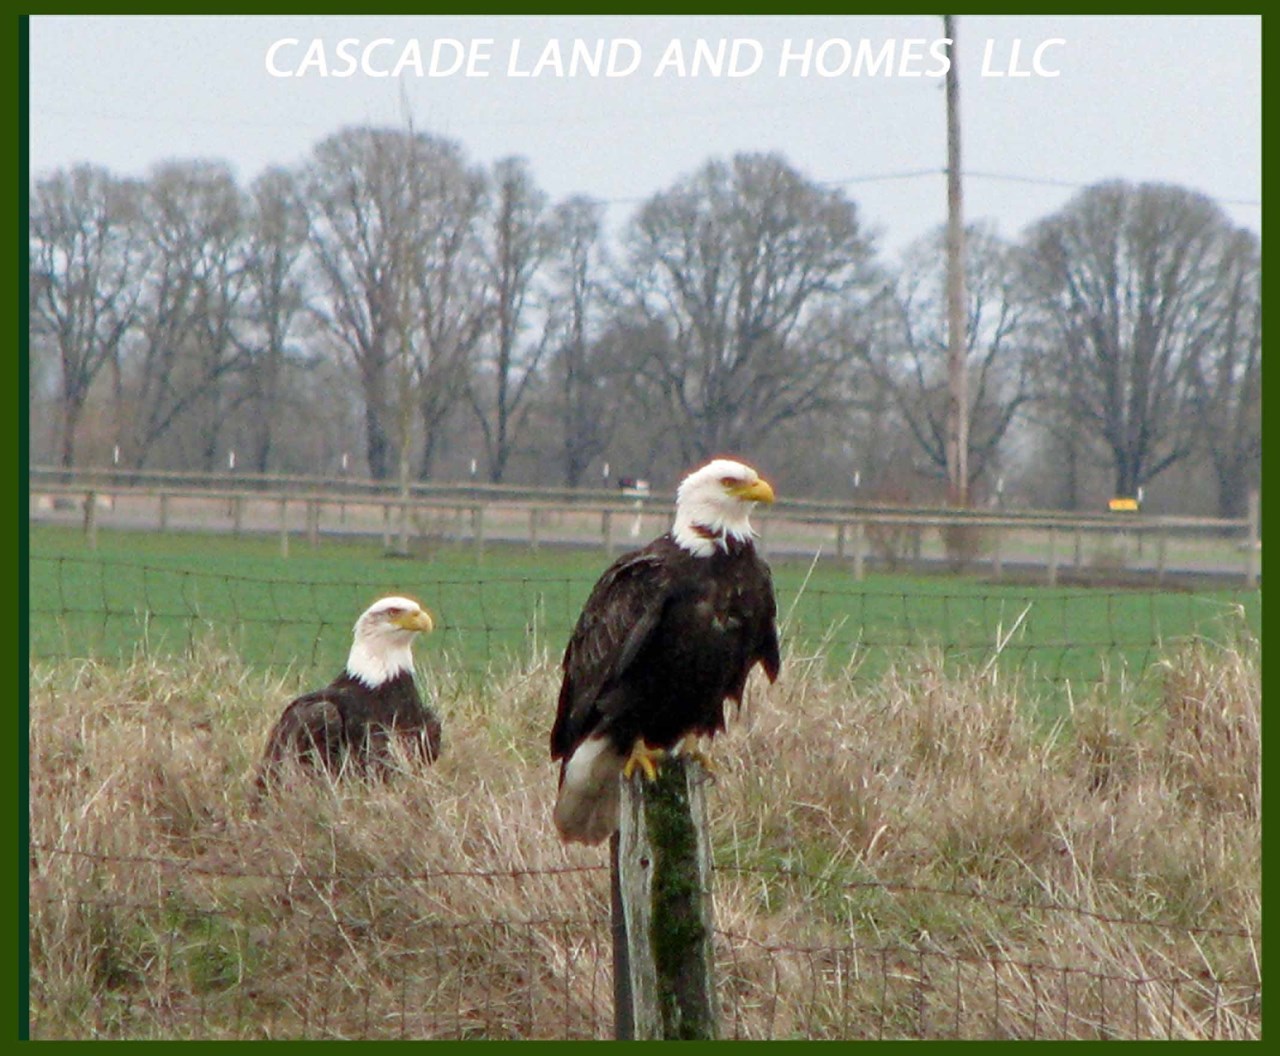 the area is in the pacific flyway for migratory birds, and over 300 species of birds come through the area! the nearby upper klamath lake has the largest congregation of wintering bald eagles in the lower 48 states!